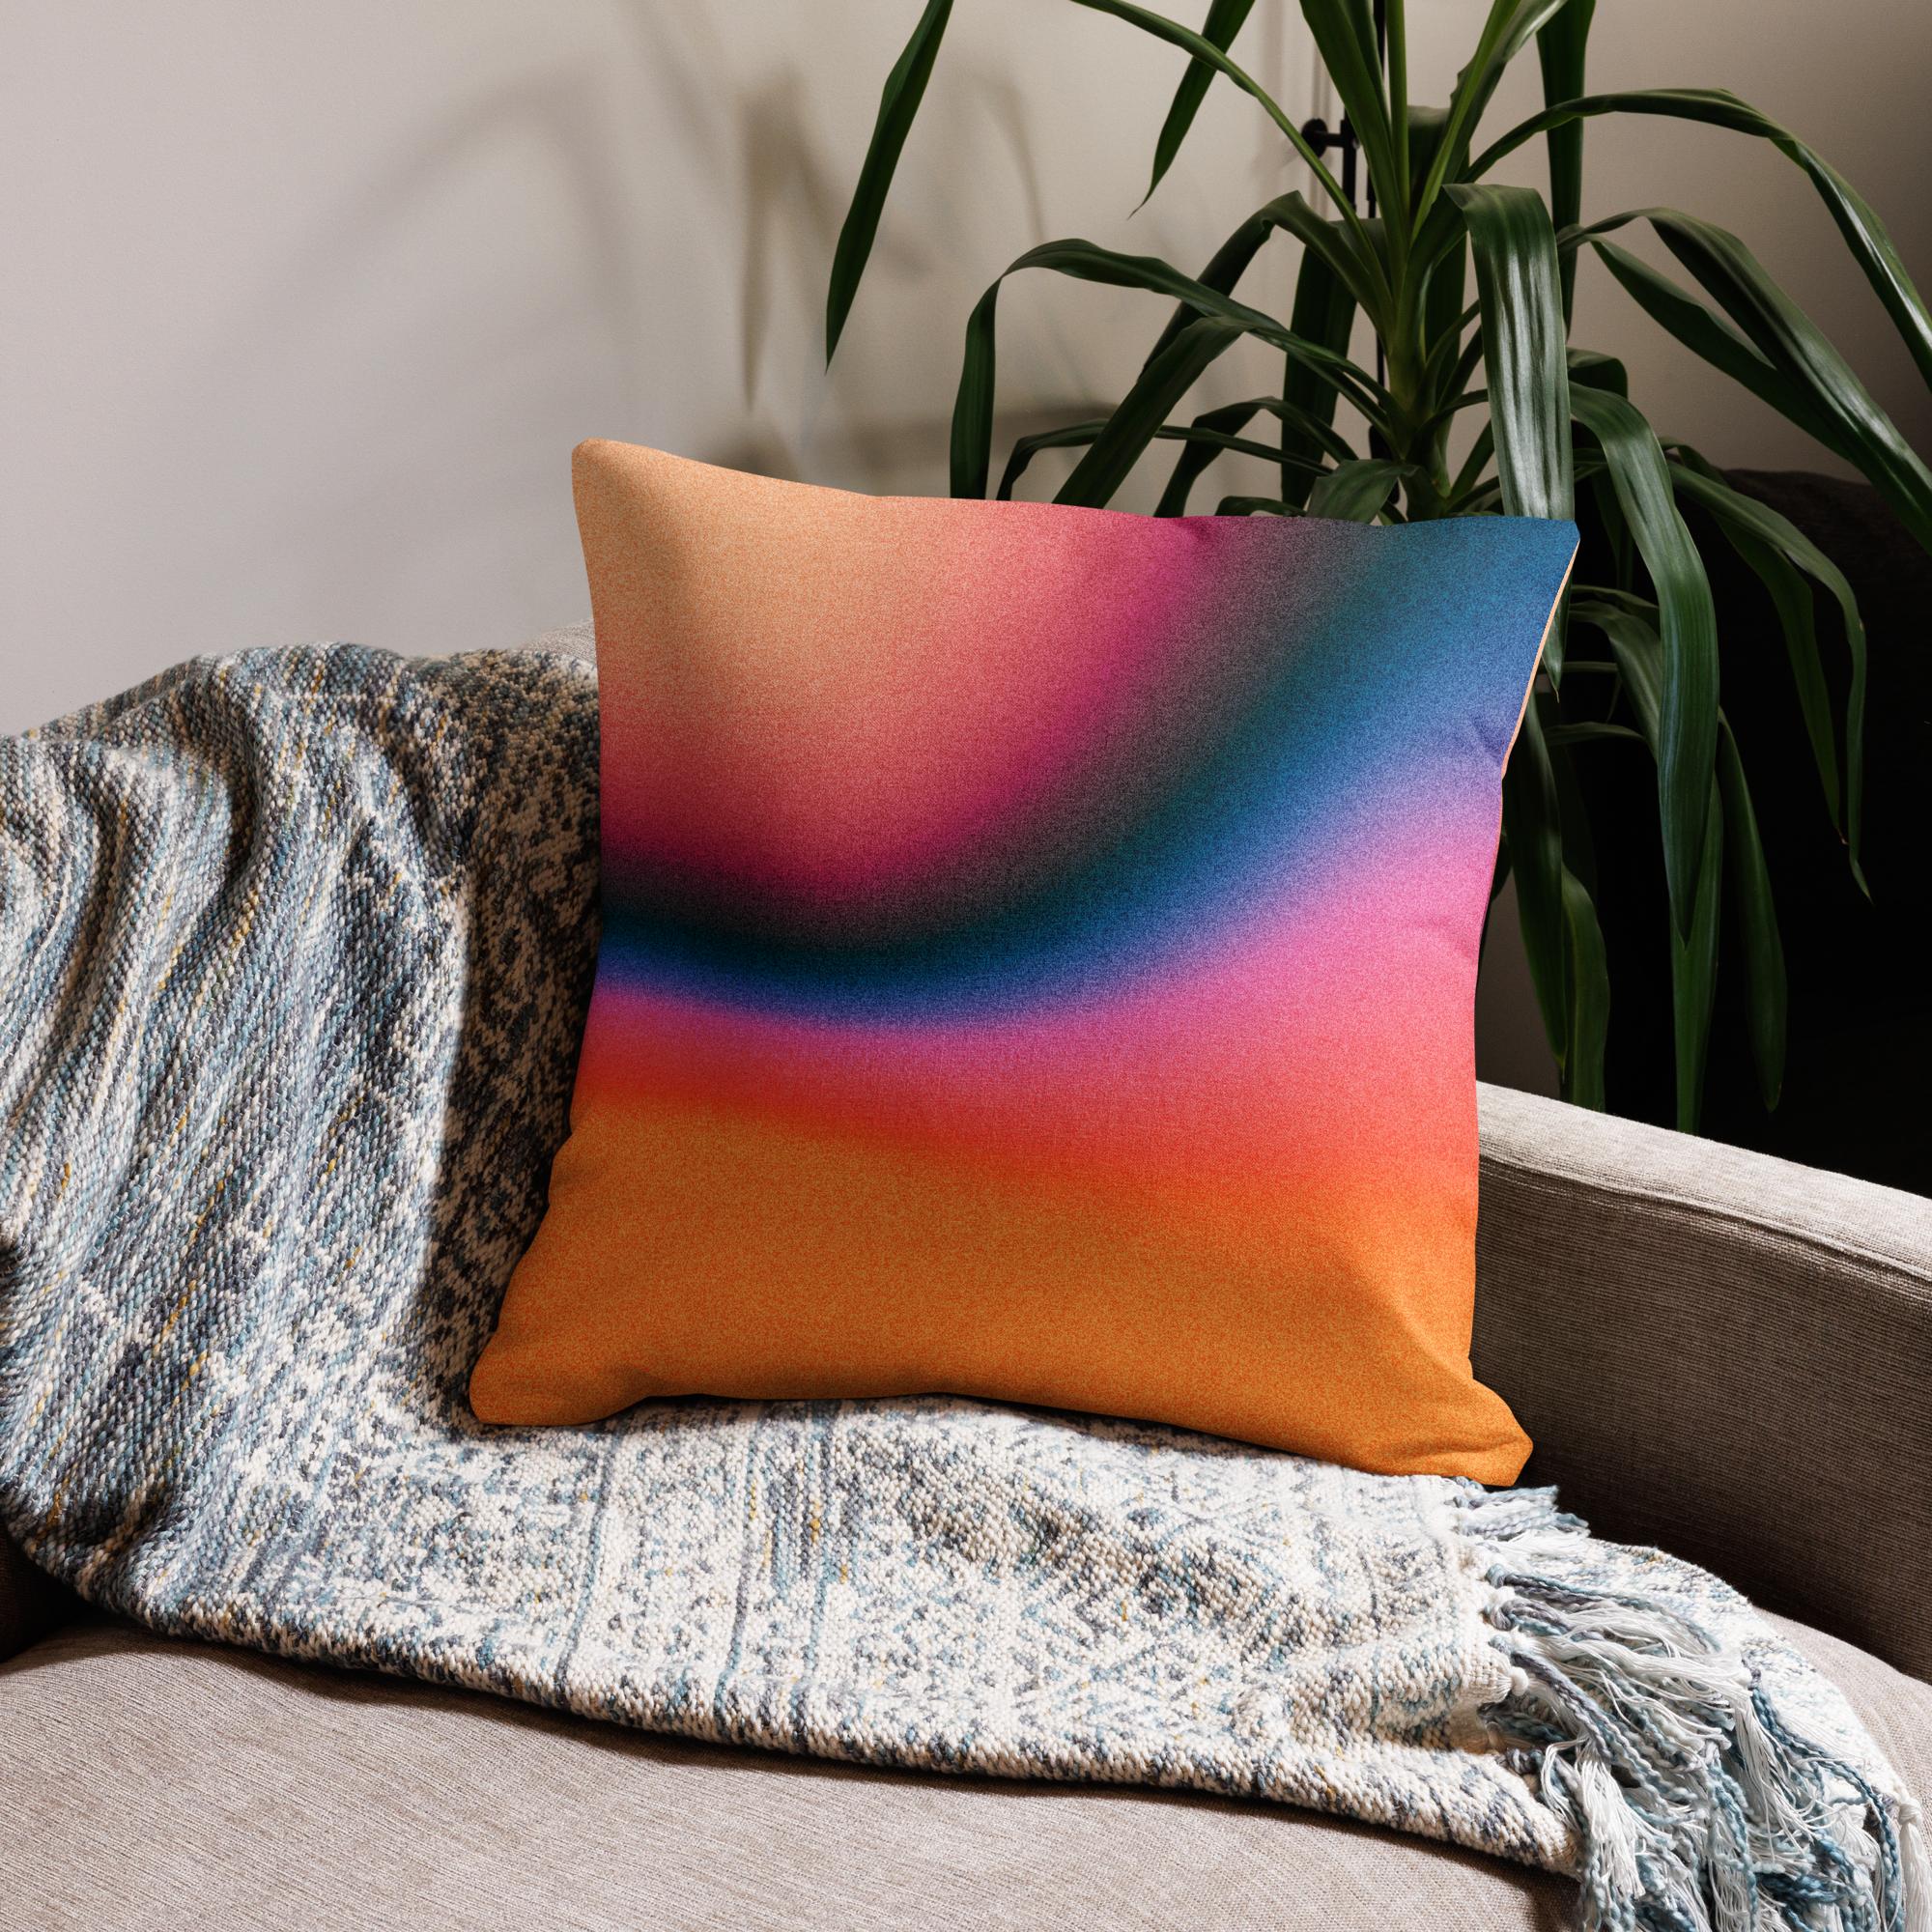 Colorful Dreams: Premium Polyester Pillow with Multicolor